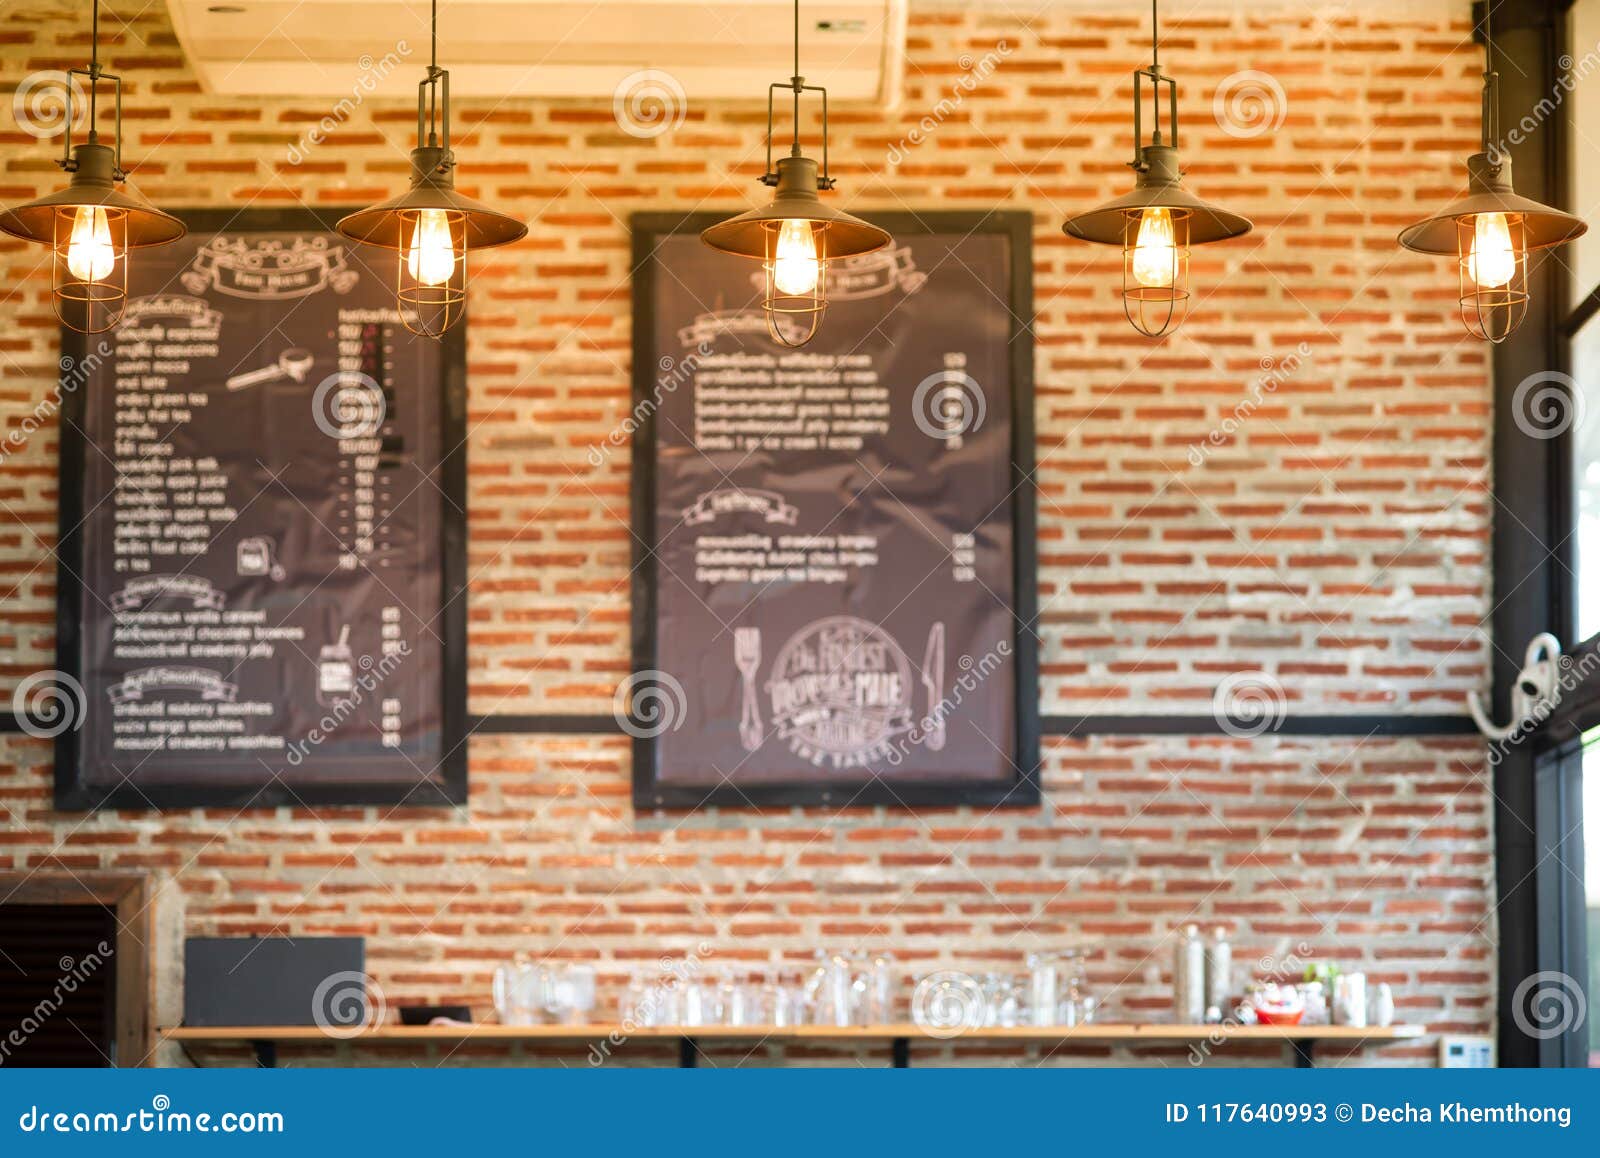 in coffee shop stock image. Image of -